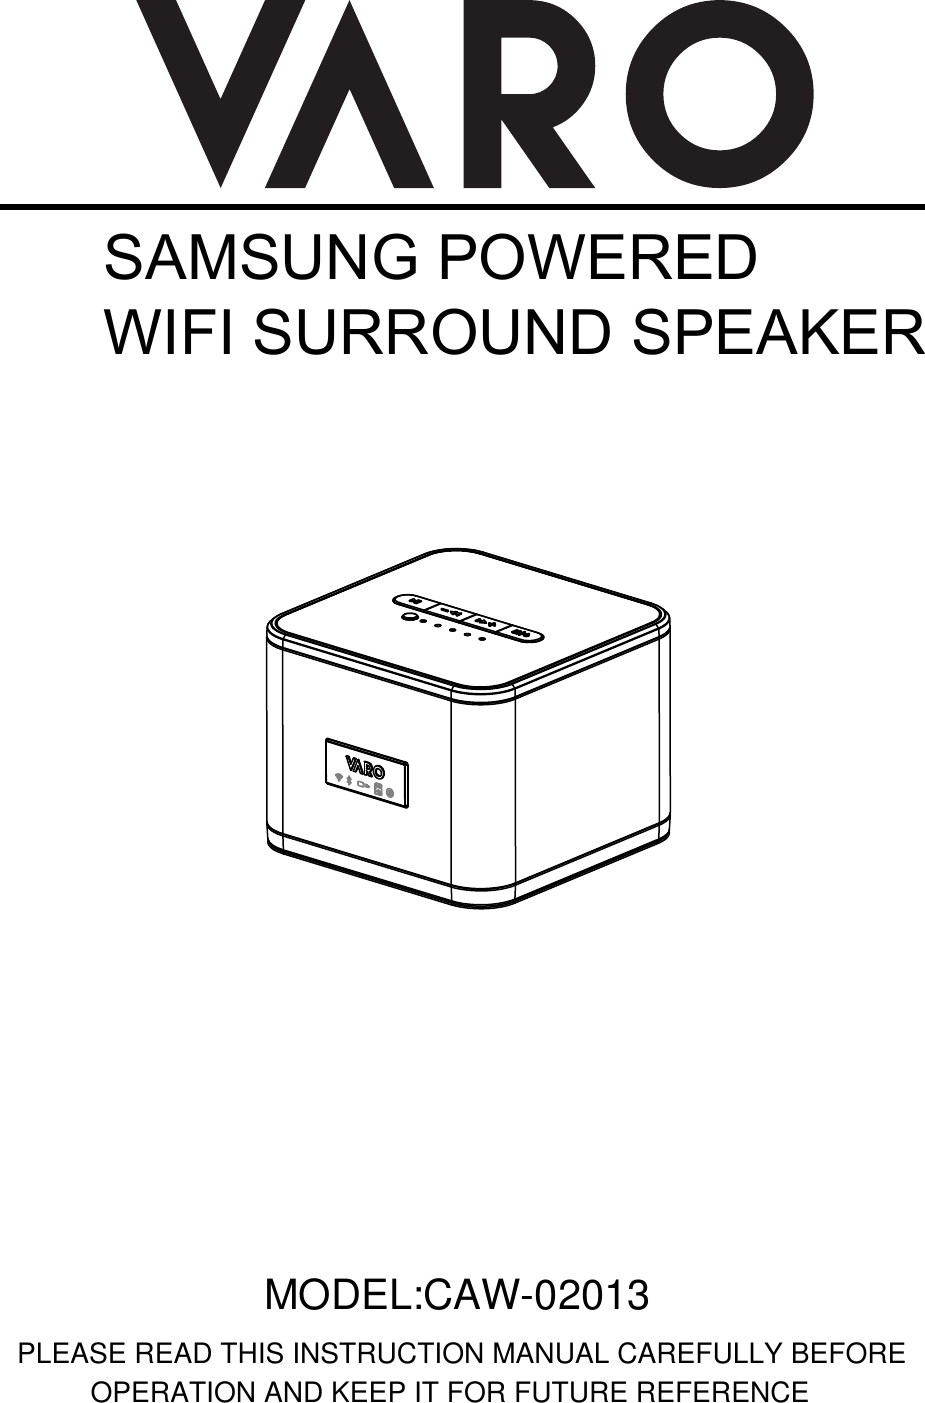 SAMSUNG POWEREDWIFI SURROUND SPEAKER MODEL:CAW-02013PLEASE READ THIS INSTRUCTION MANUAL CAREFULLY BEFORE OPERATION AND KEEP IT FOR FUTURE REFERENCE 